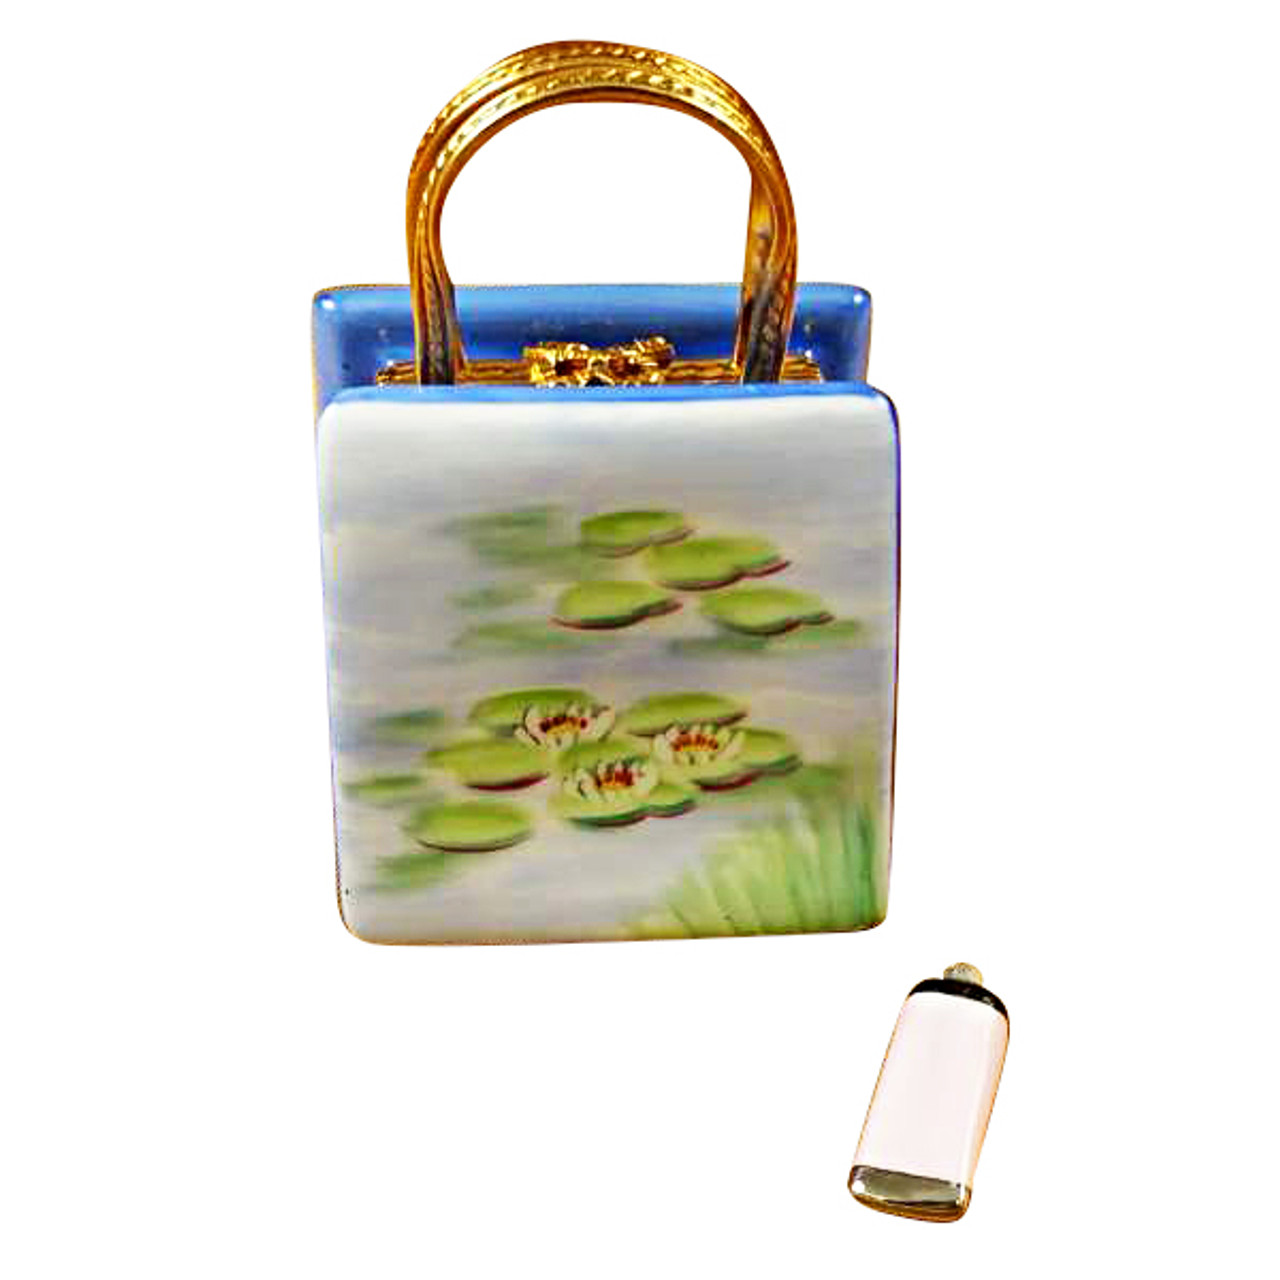 Monet Bag With Bridge And Water Lily Includes Removable Paint Tube Rochard Limoges Box